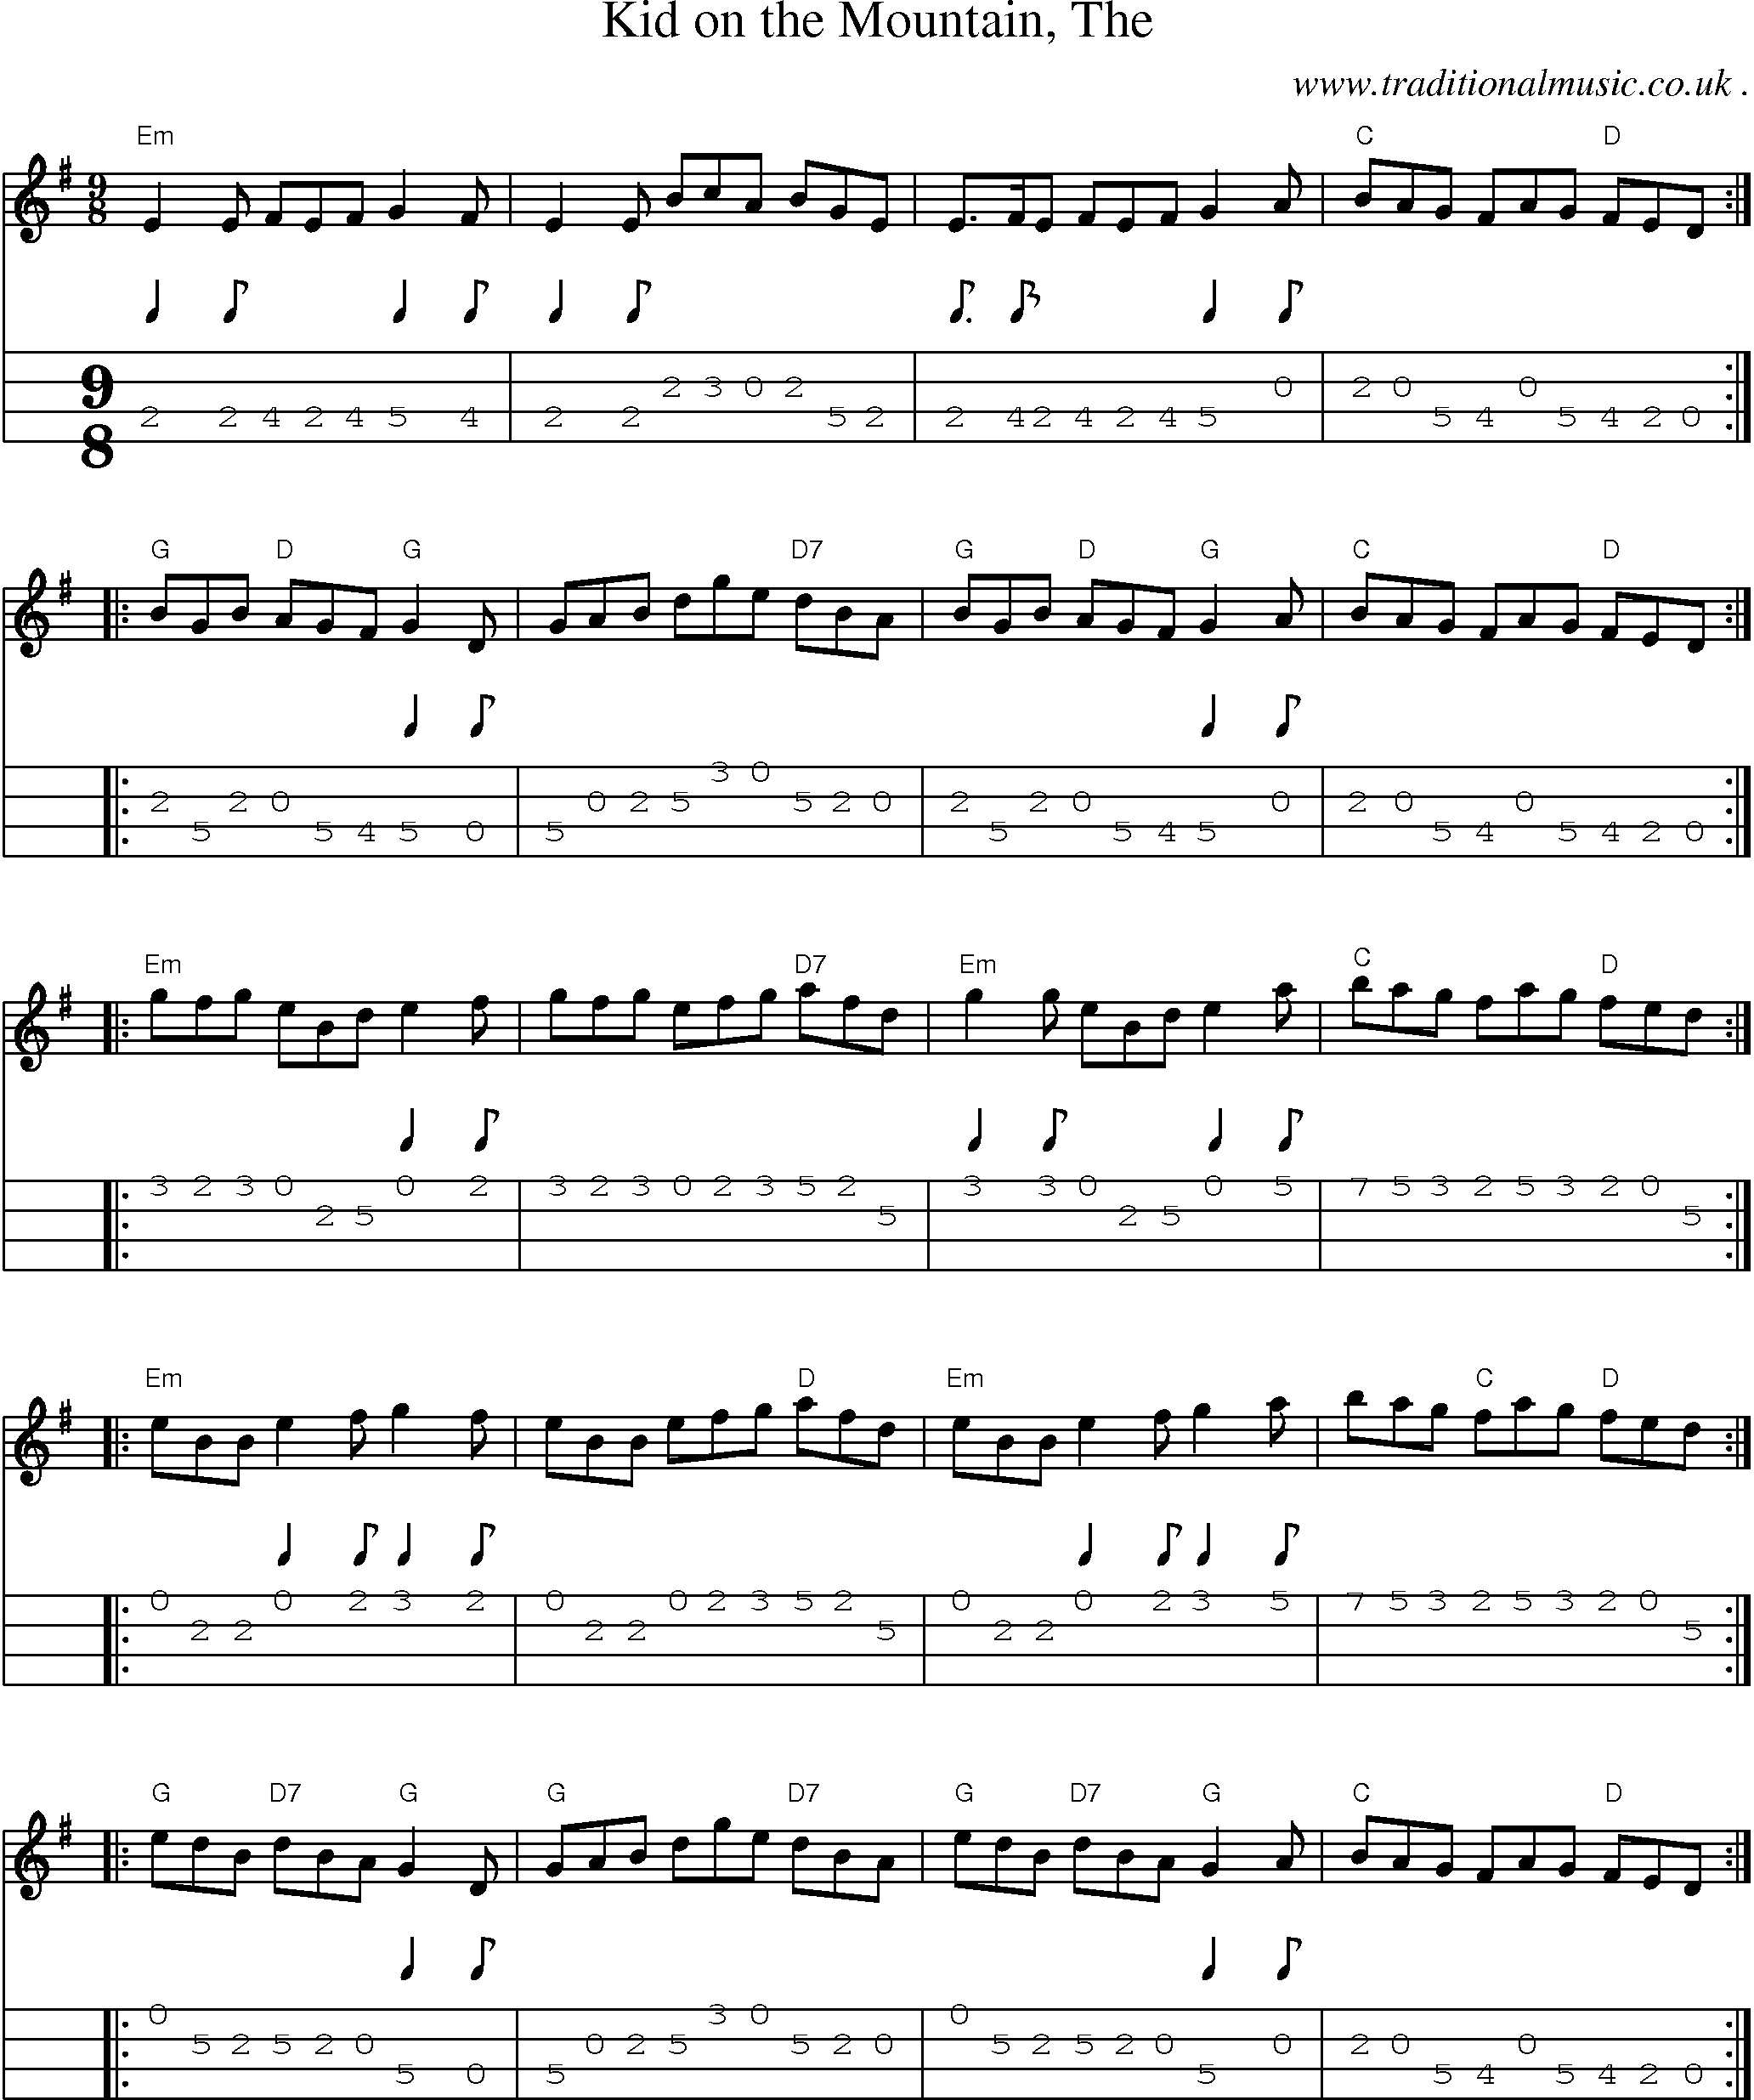 Music Score and Guitar Tabs for Kid on the Mountain The